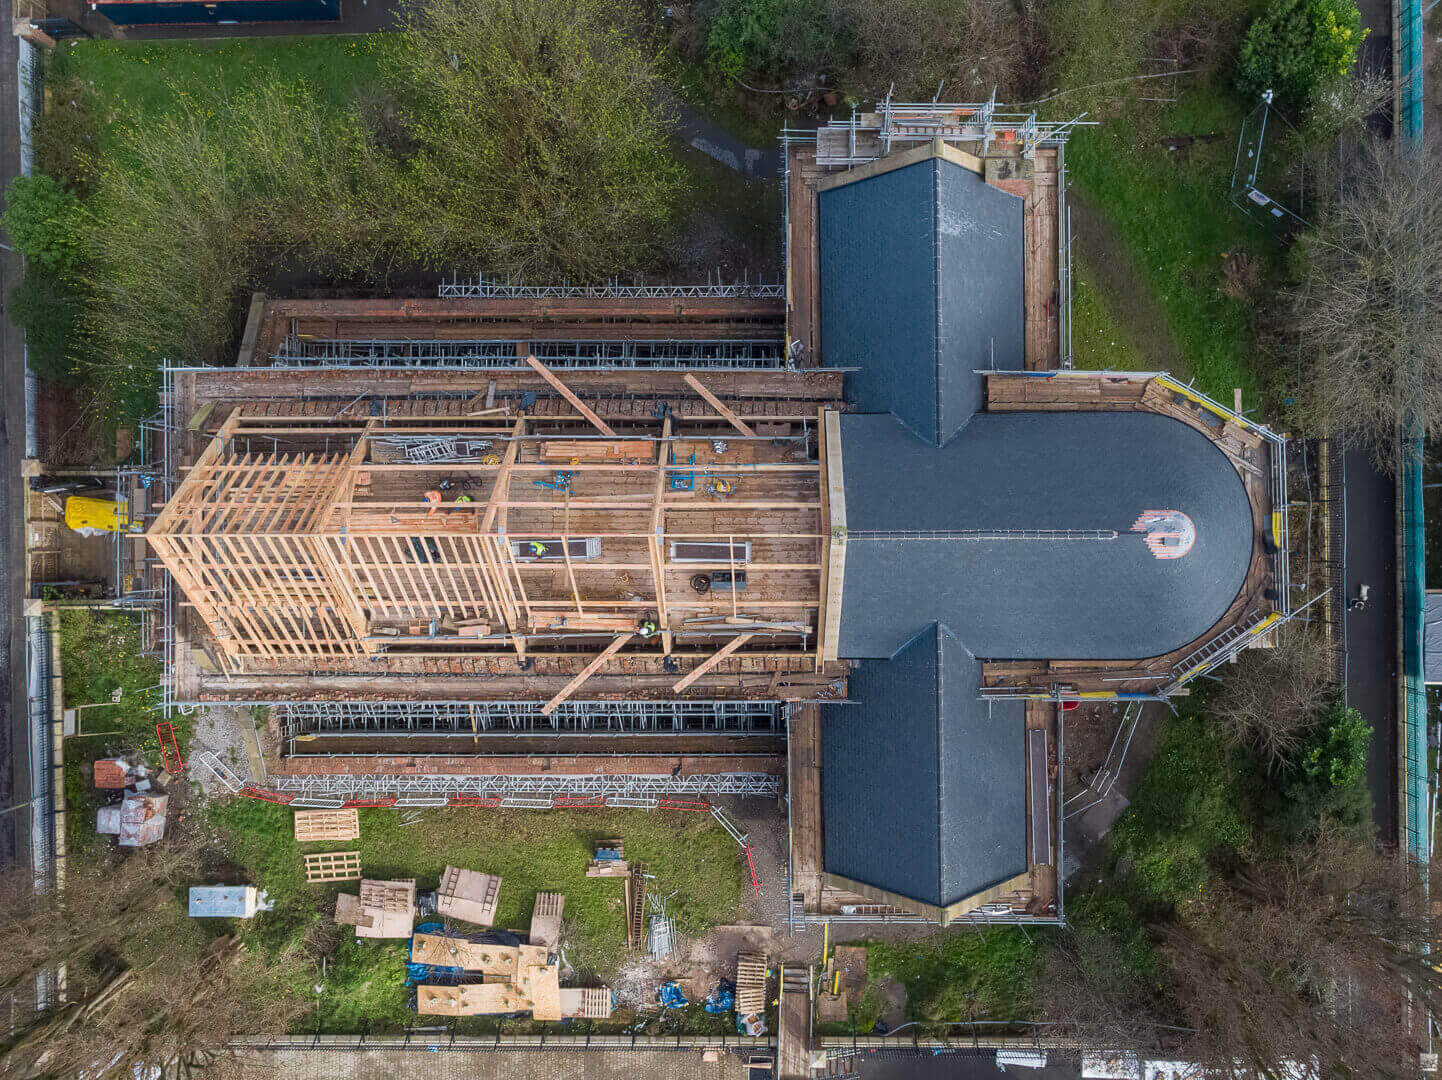 Aerial drone survey photography - The Church of The Ascension, Salford